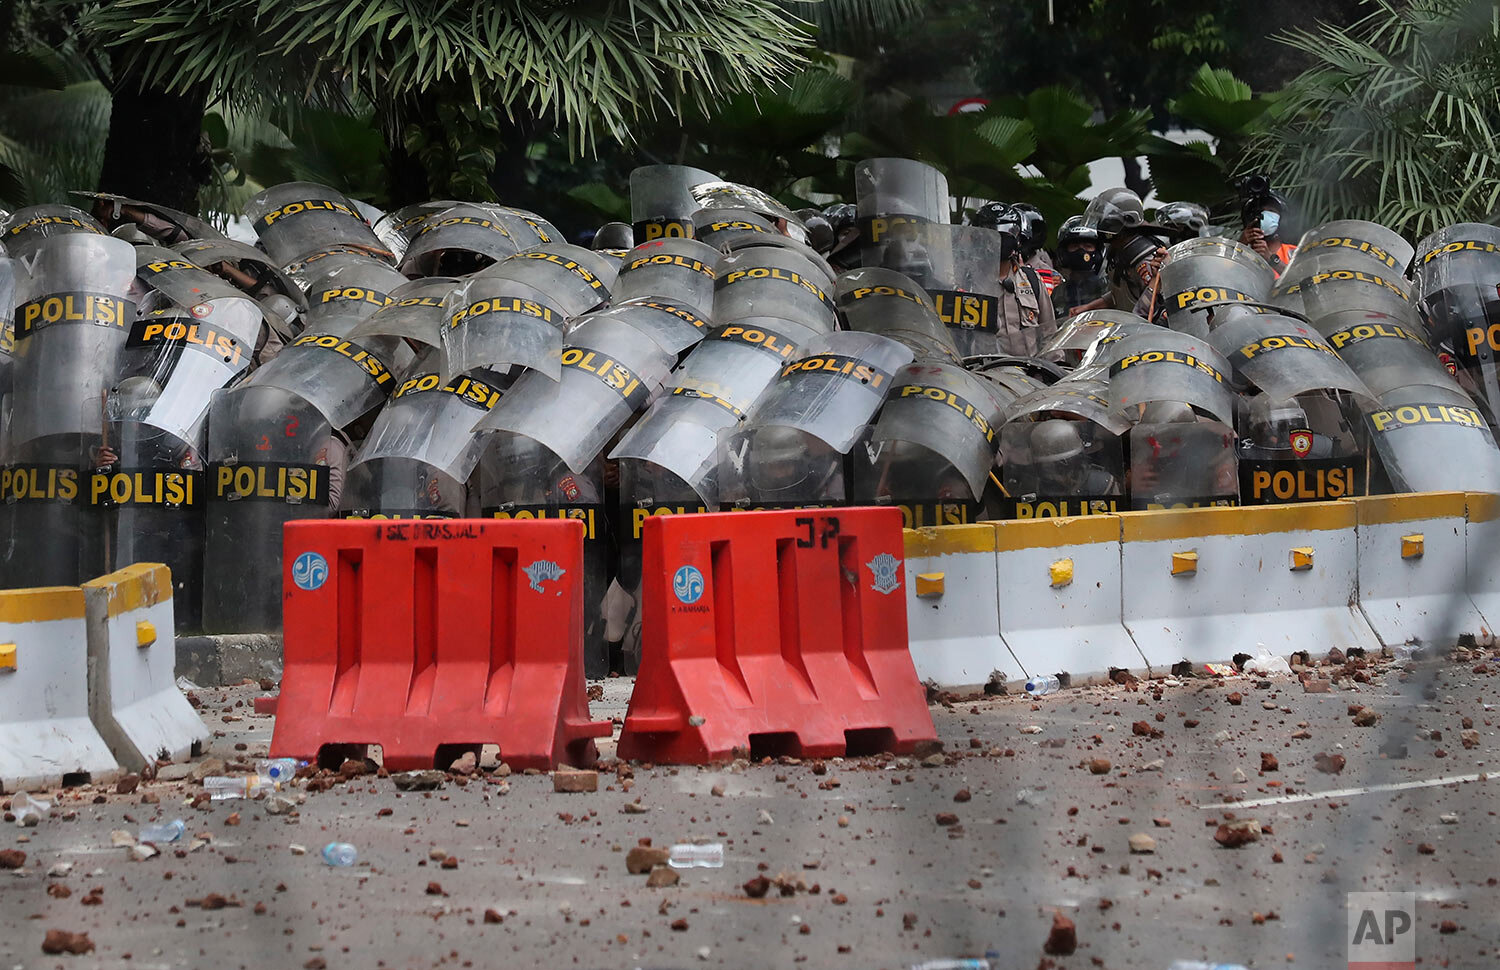  Riot police use their shields to form a defensive cover during a protest against the new Job Creation Law approved by Parliament, in Jakarta, Indonesia, Tuesday, Oct. 13, 2020. (AP Photo/Tatan Syuflana) 